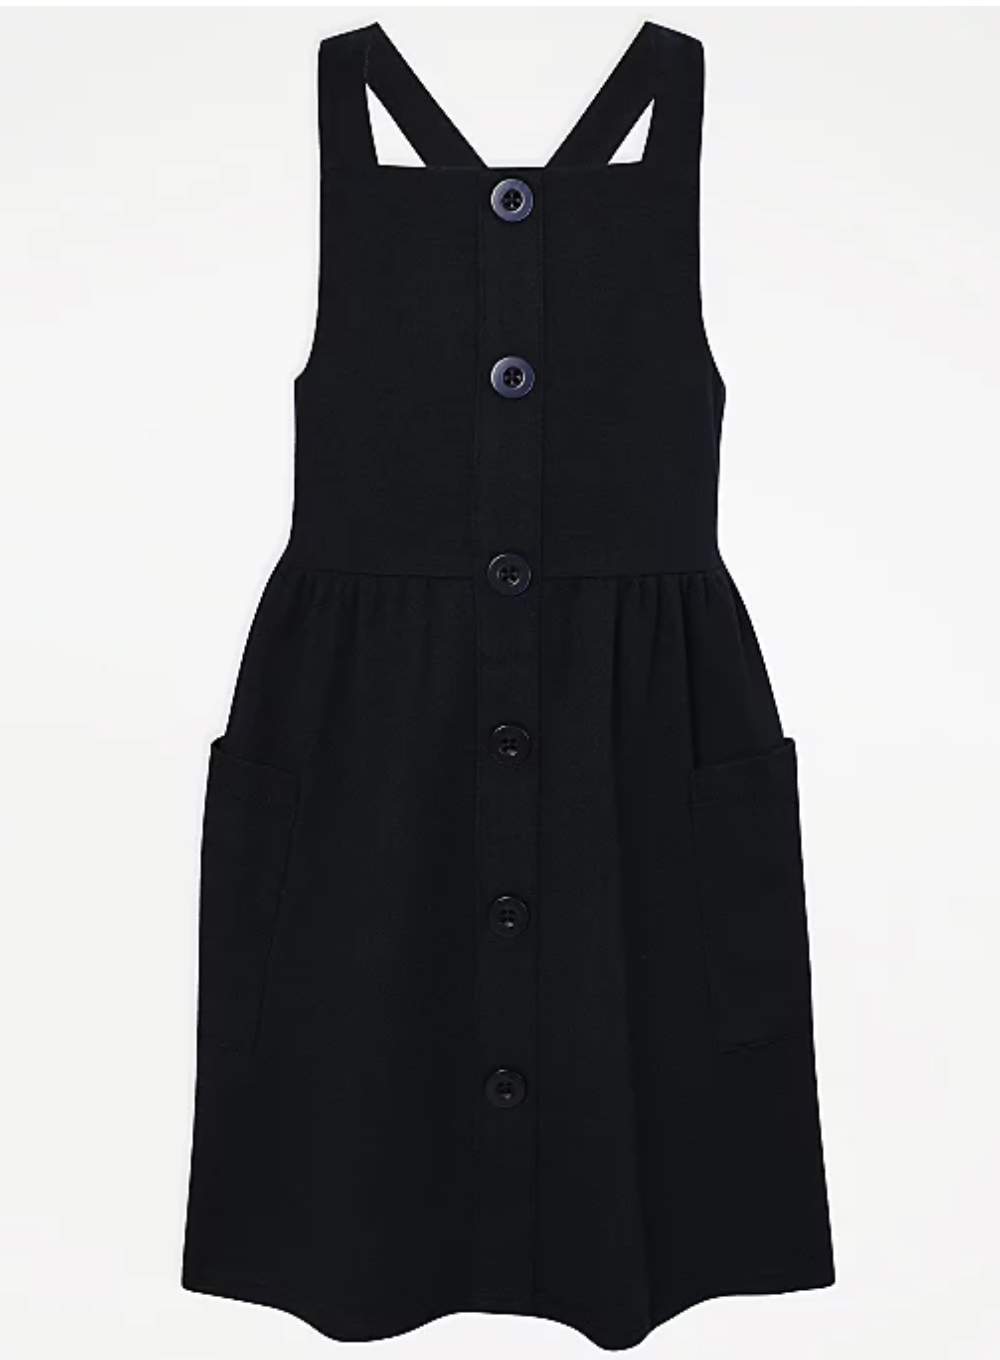 Girls' Navy Sleeveless Jersey Pinafore Dress, Square Neckline, Front Pockets, 5-6 Y